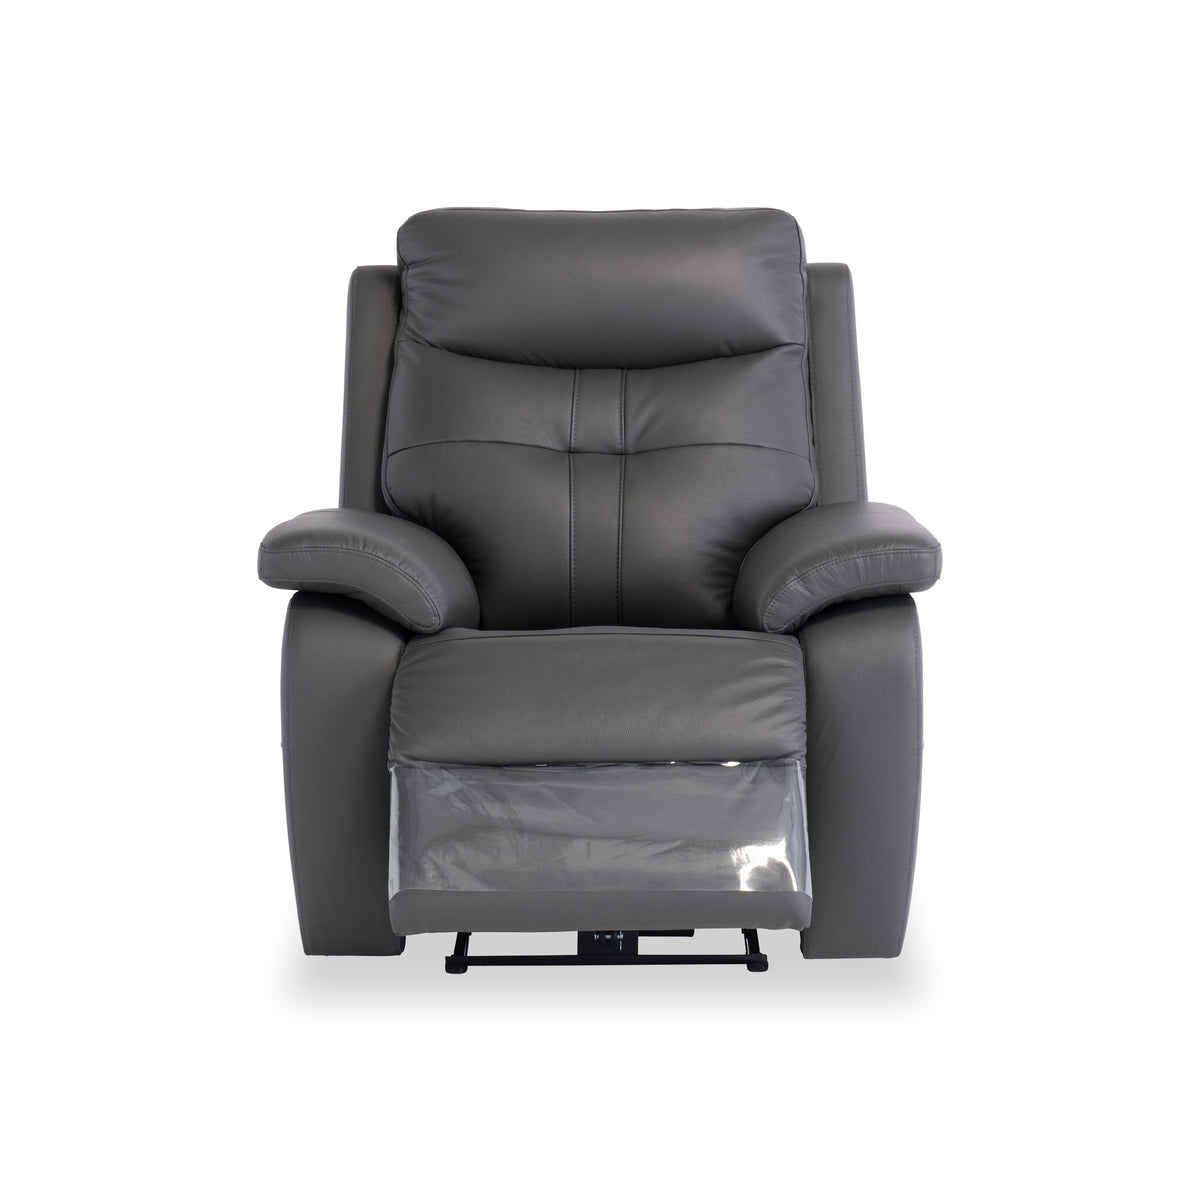 Talbot Charcoal Leather Electric Reclining Armchair from Roseland Furniture